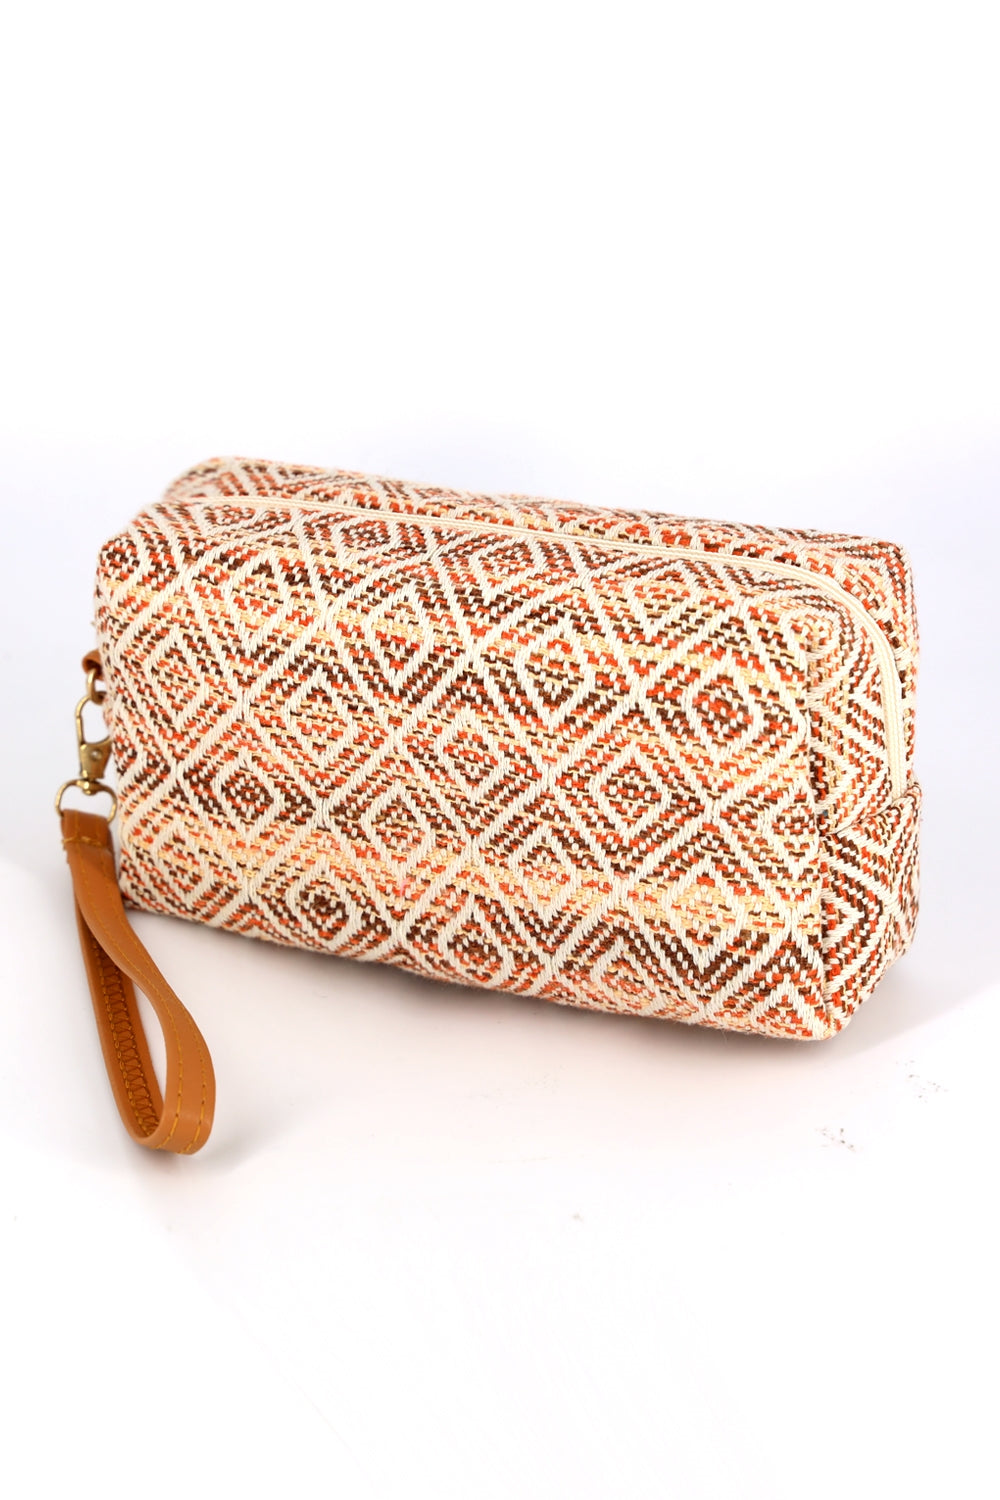 Aztec Pattern Pouch Wristlet Brown - Pack of 6